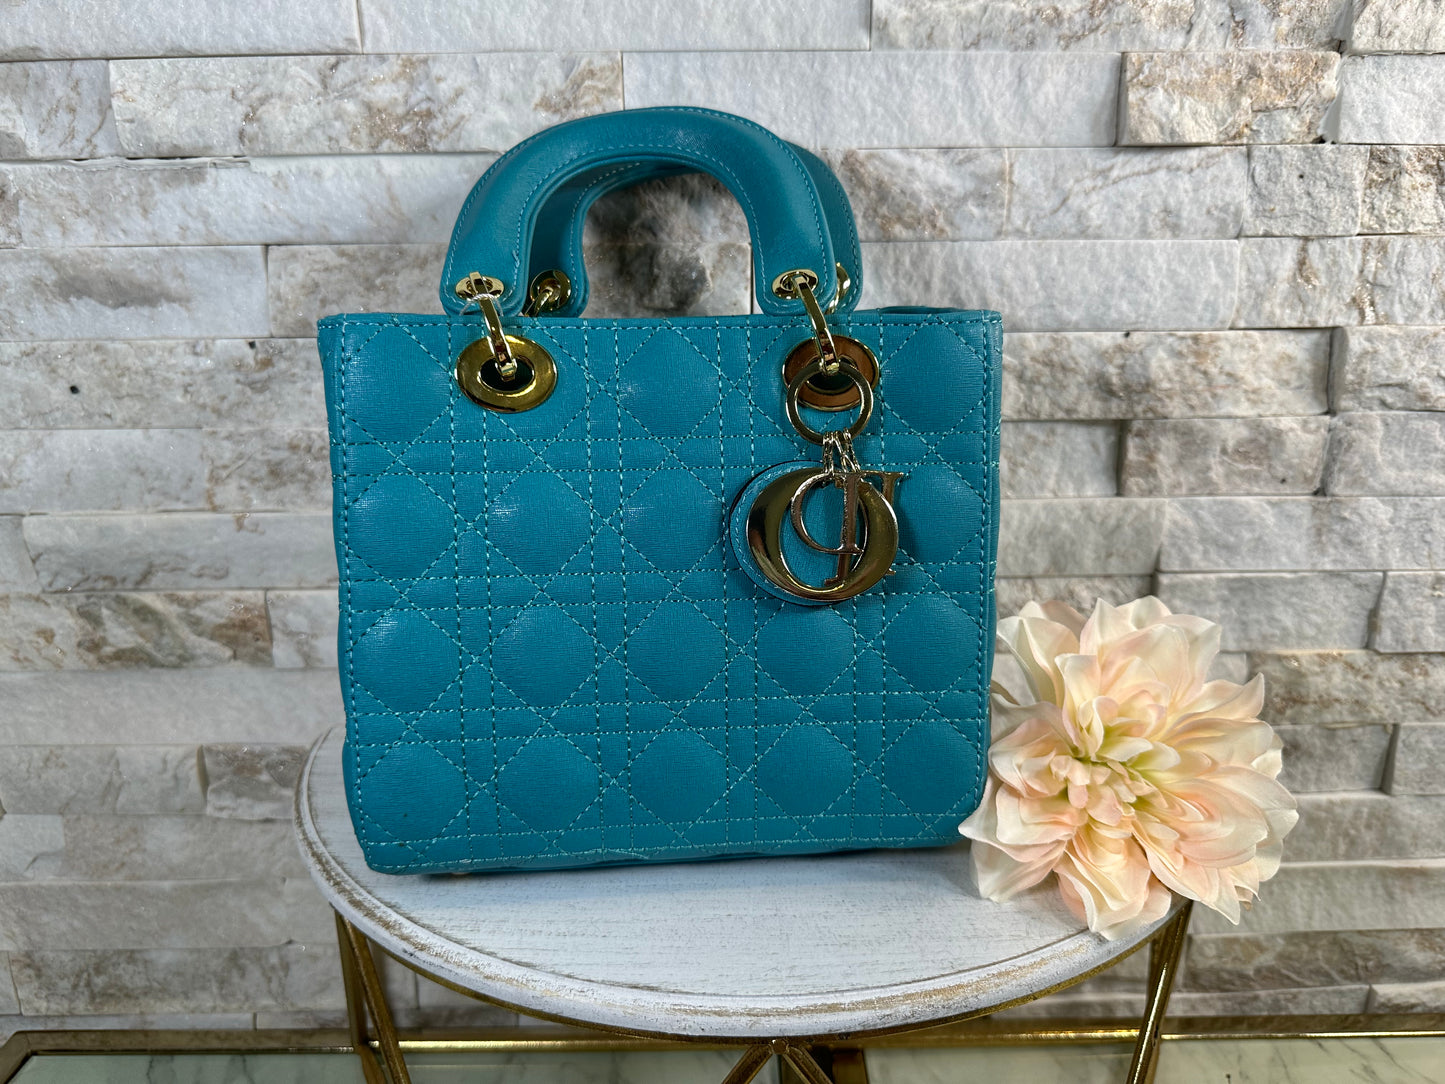 Teal and Gold Lady D Inspired Bag